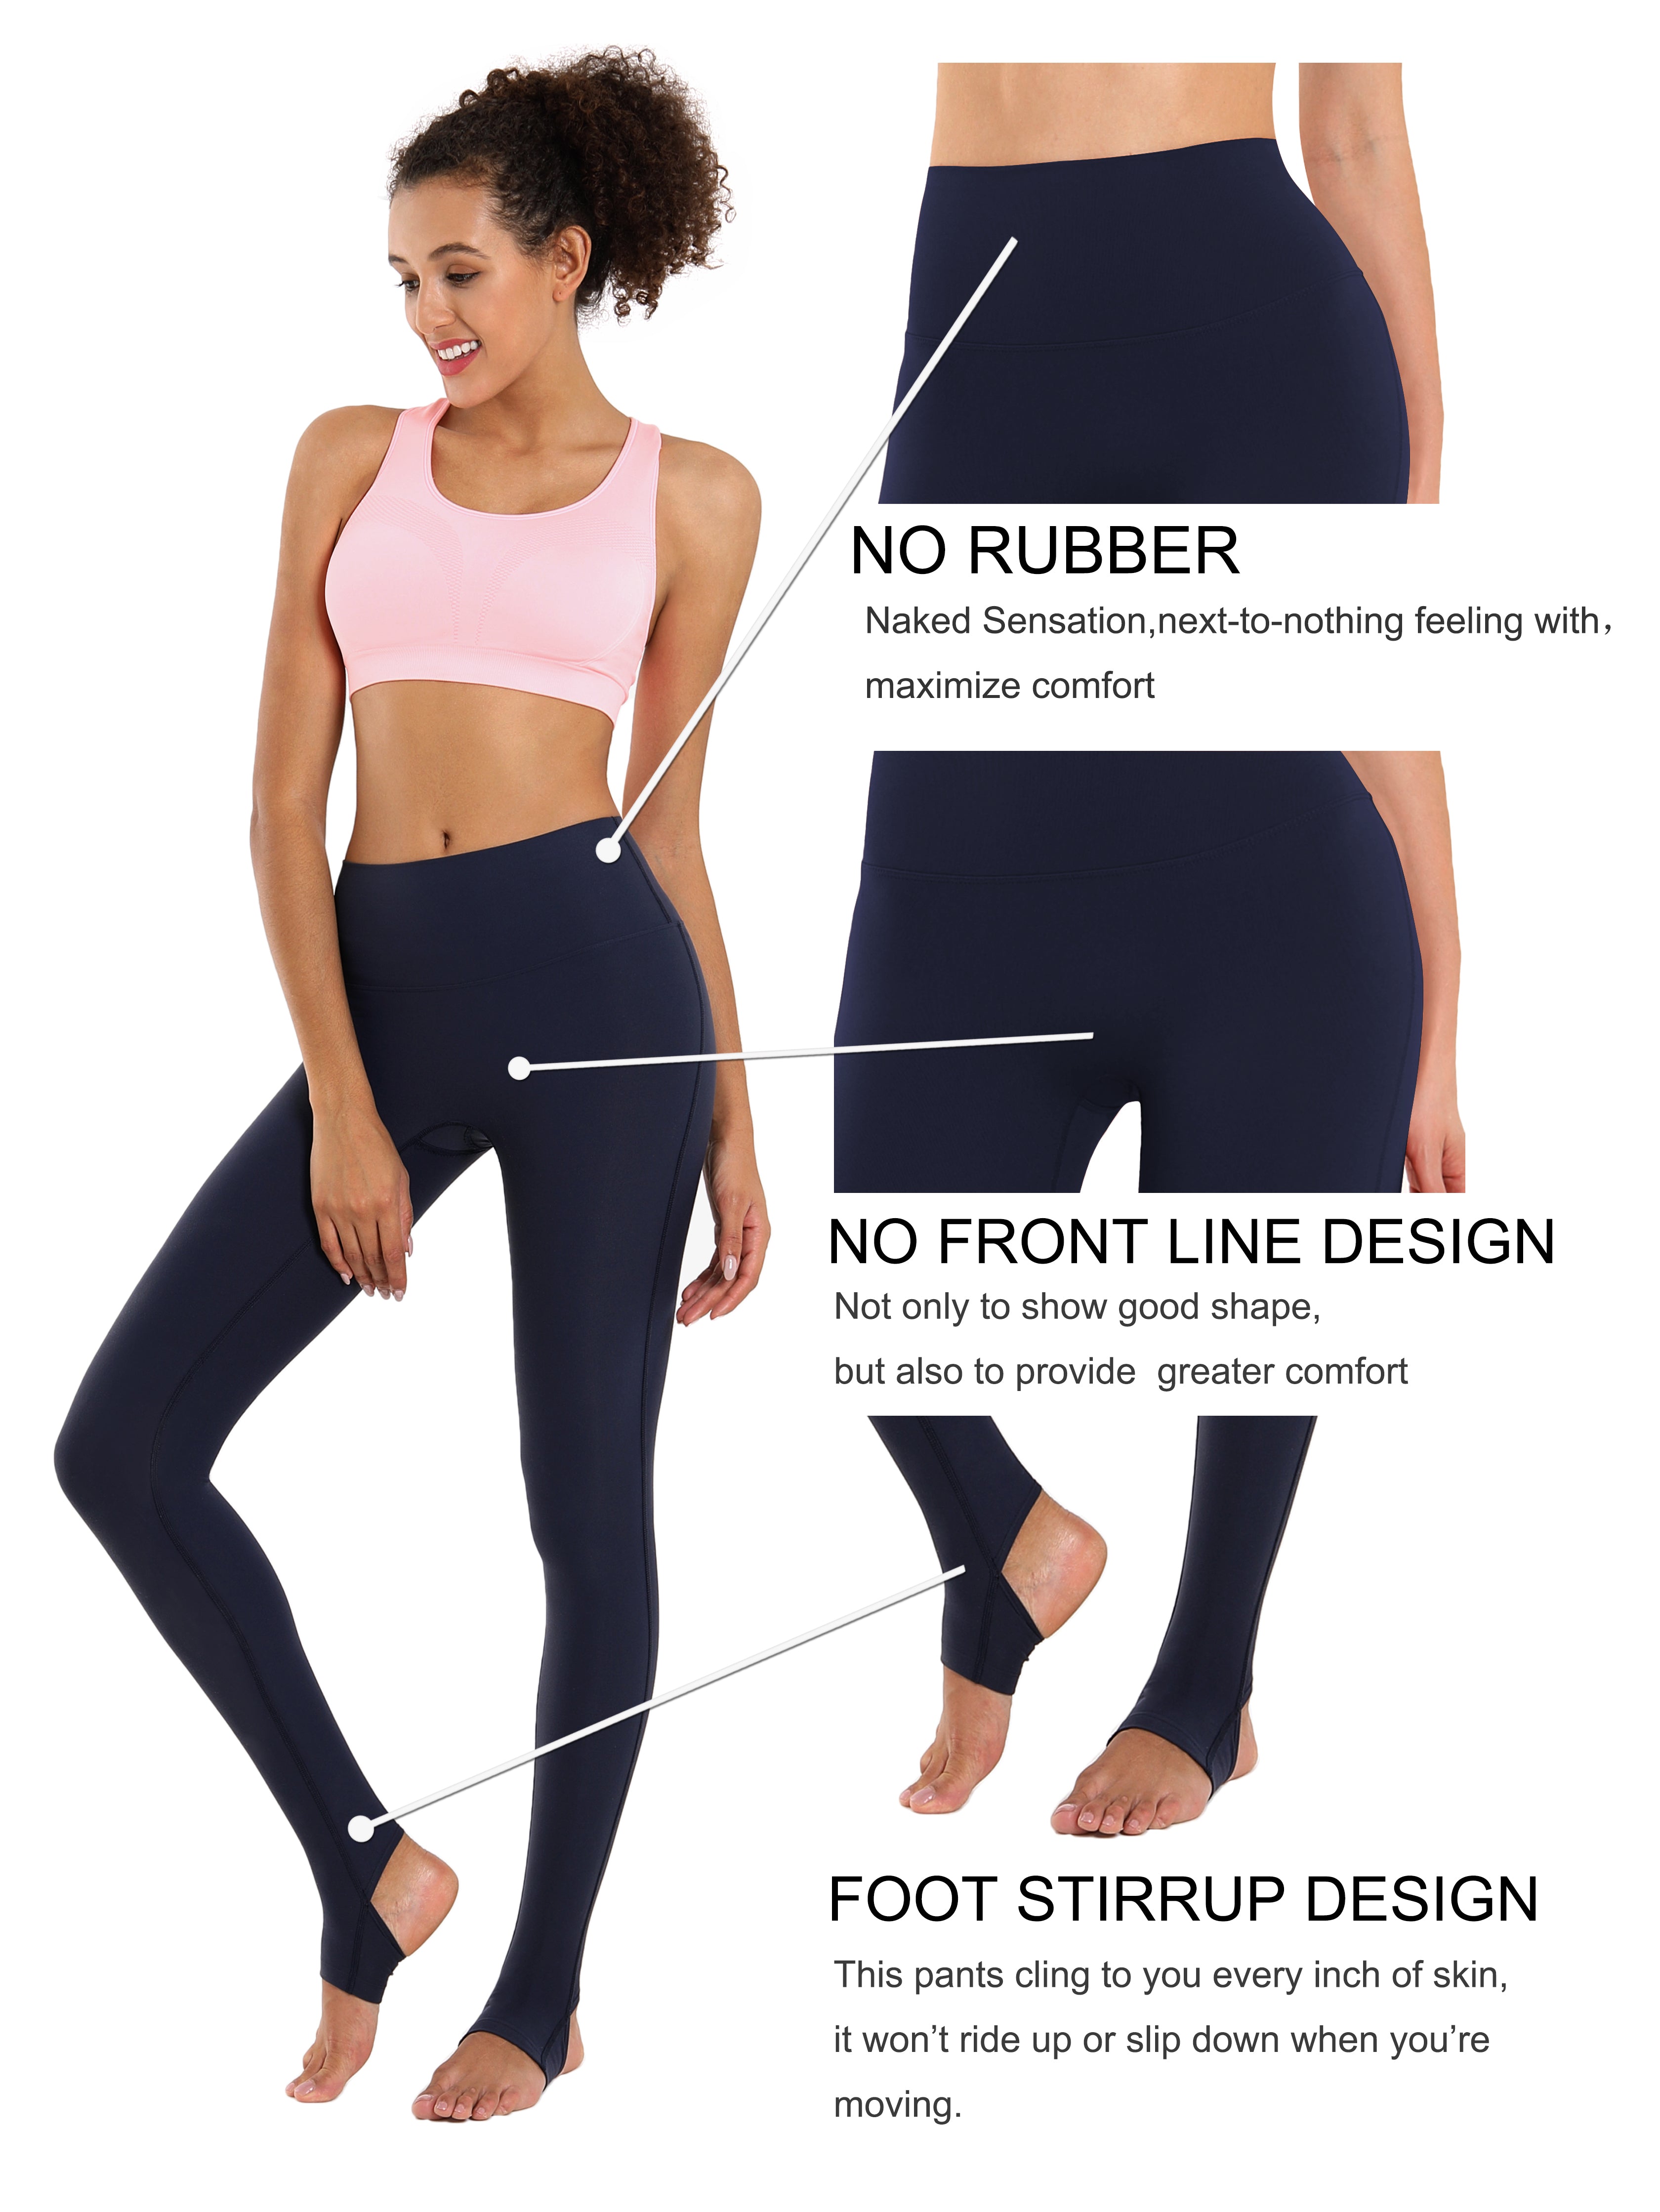 Over the Heel Pilates Pants darknavy Over the Heel Design 87%Nylon/13%Spandex Fabric doesn't attract lint easily 4-way stretch No see-through Moisture-wicking Tummy control